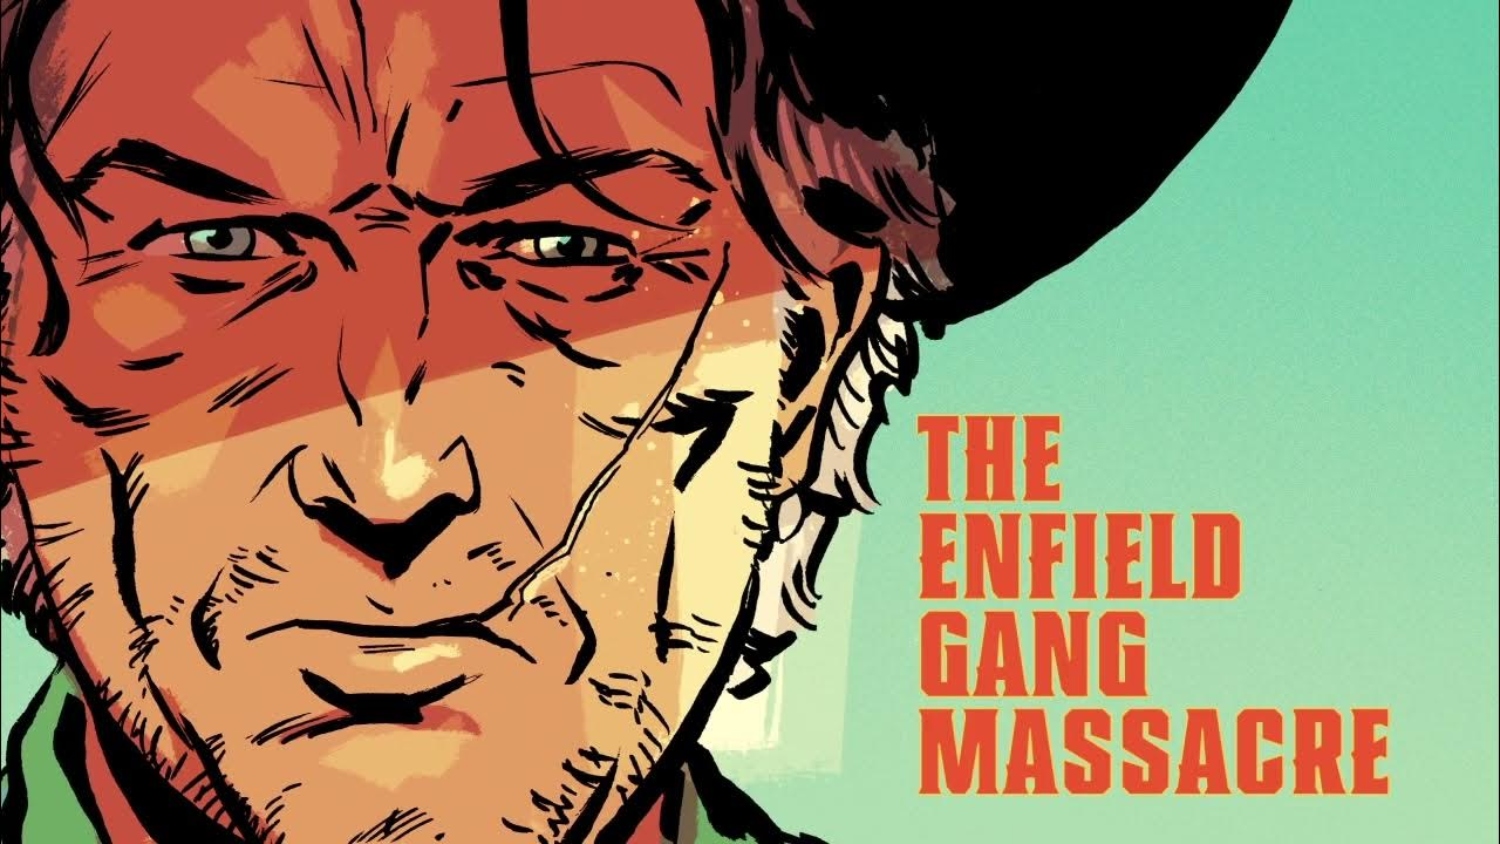 Chris Condon and Jacob Phillips share insights, new story preview from 'The Enfield Gang Massacre' TPB